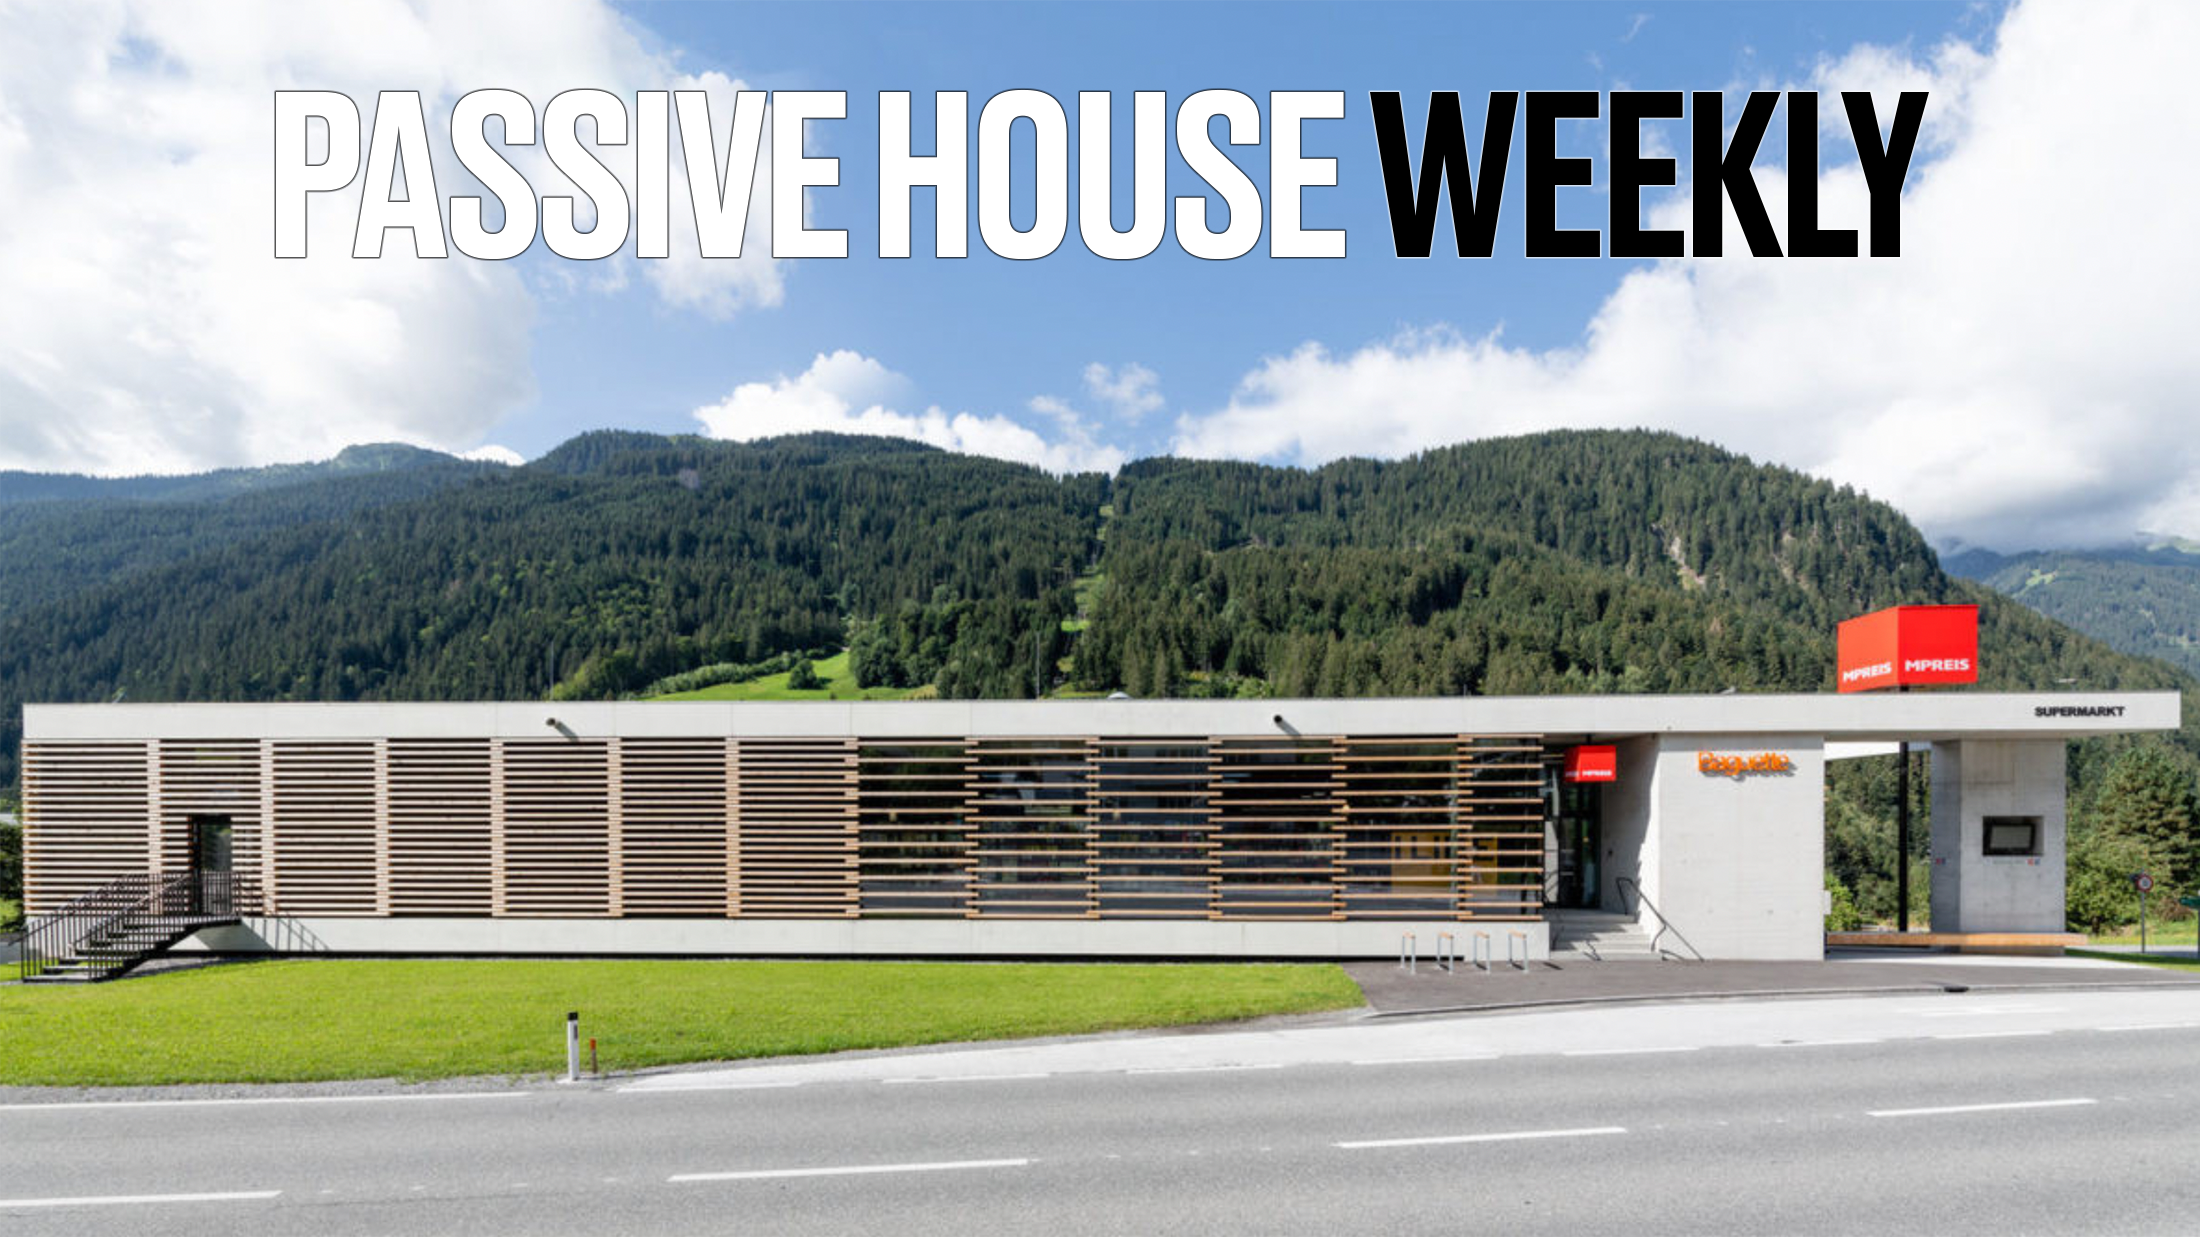 Passive House Weekly: April 18, 2022